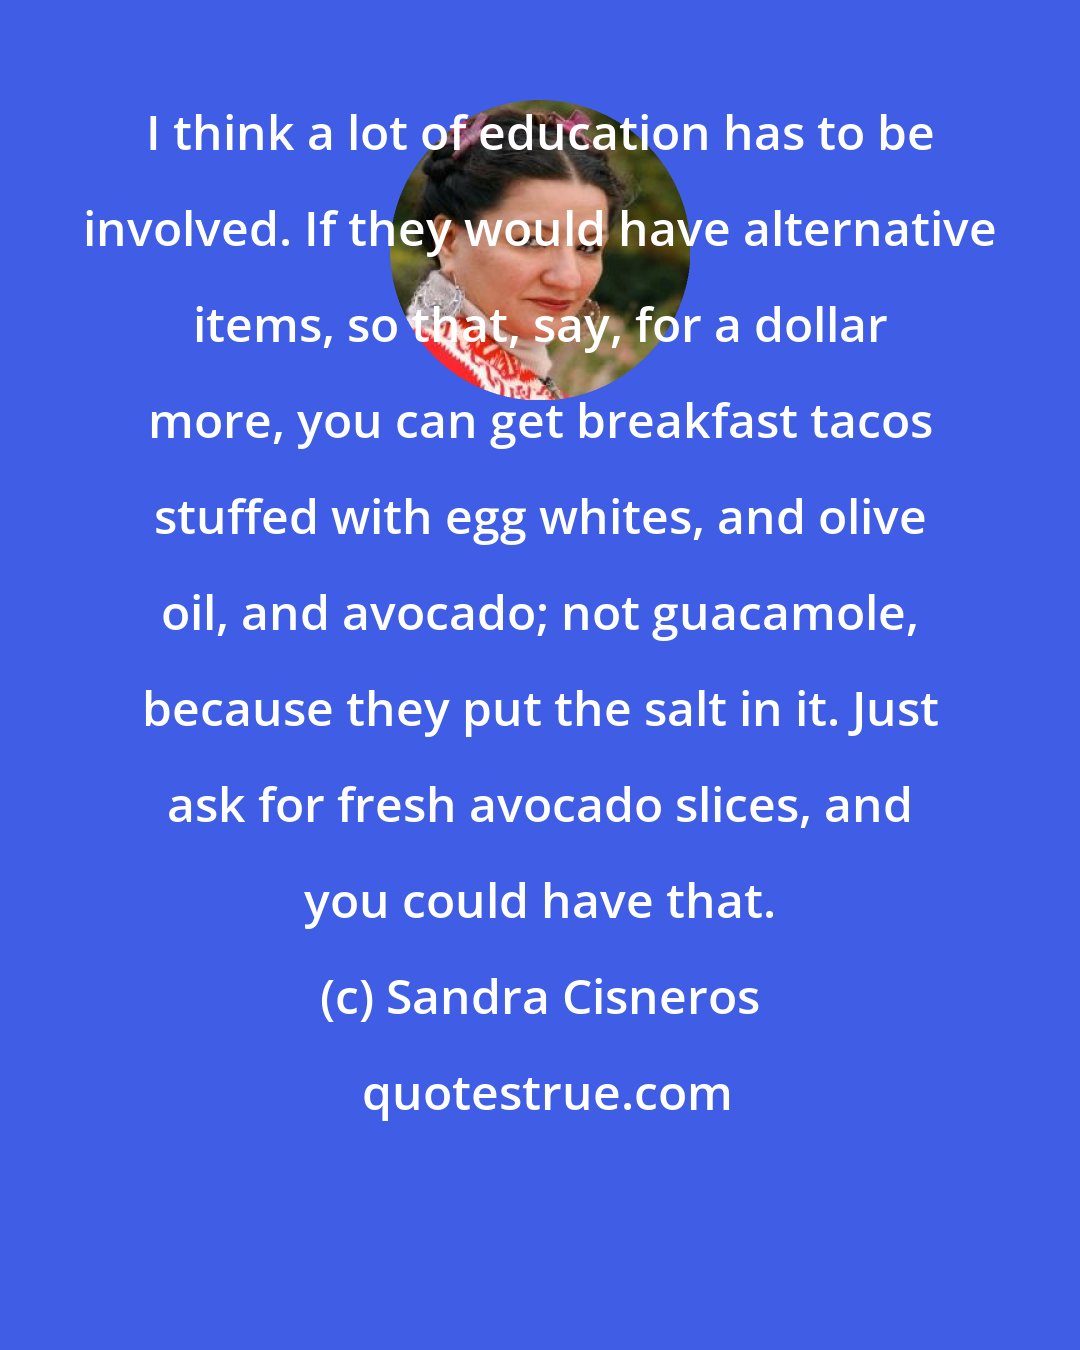 Sandra Cisneros: I think a lot of education has to be involved. If they would have alternative items, so that, say, for a dollar more, you can get breakfast tacos stuffed with egg whites, and olive oil, and avocado; not guacamole, because they put the salt in it. Just ask for fresh avocado slices, and you could have that.